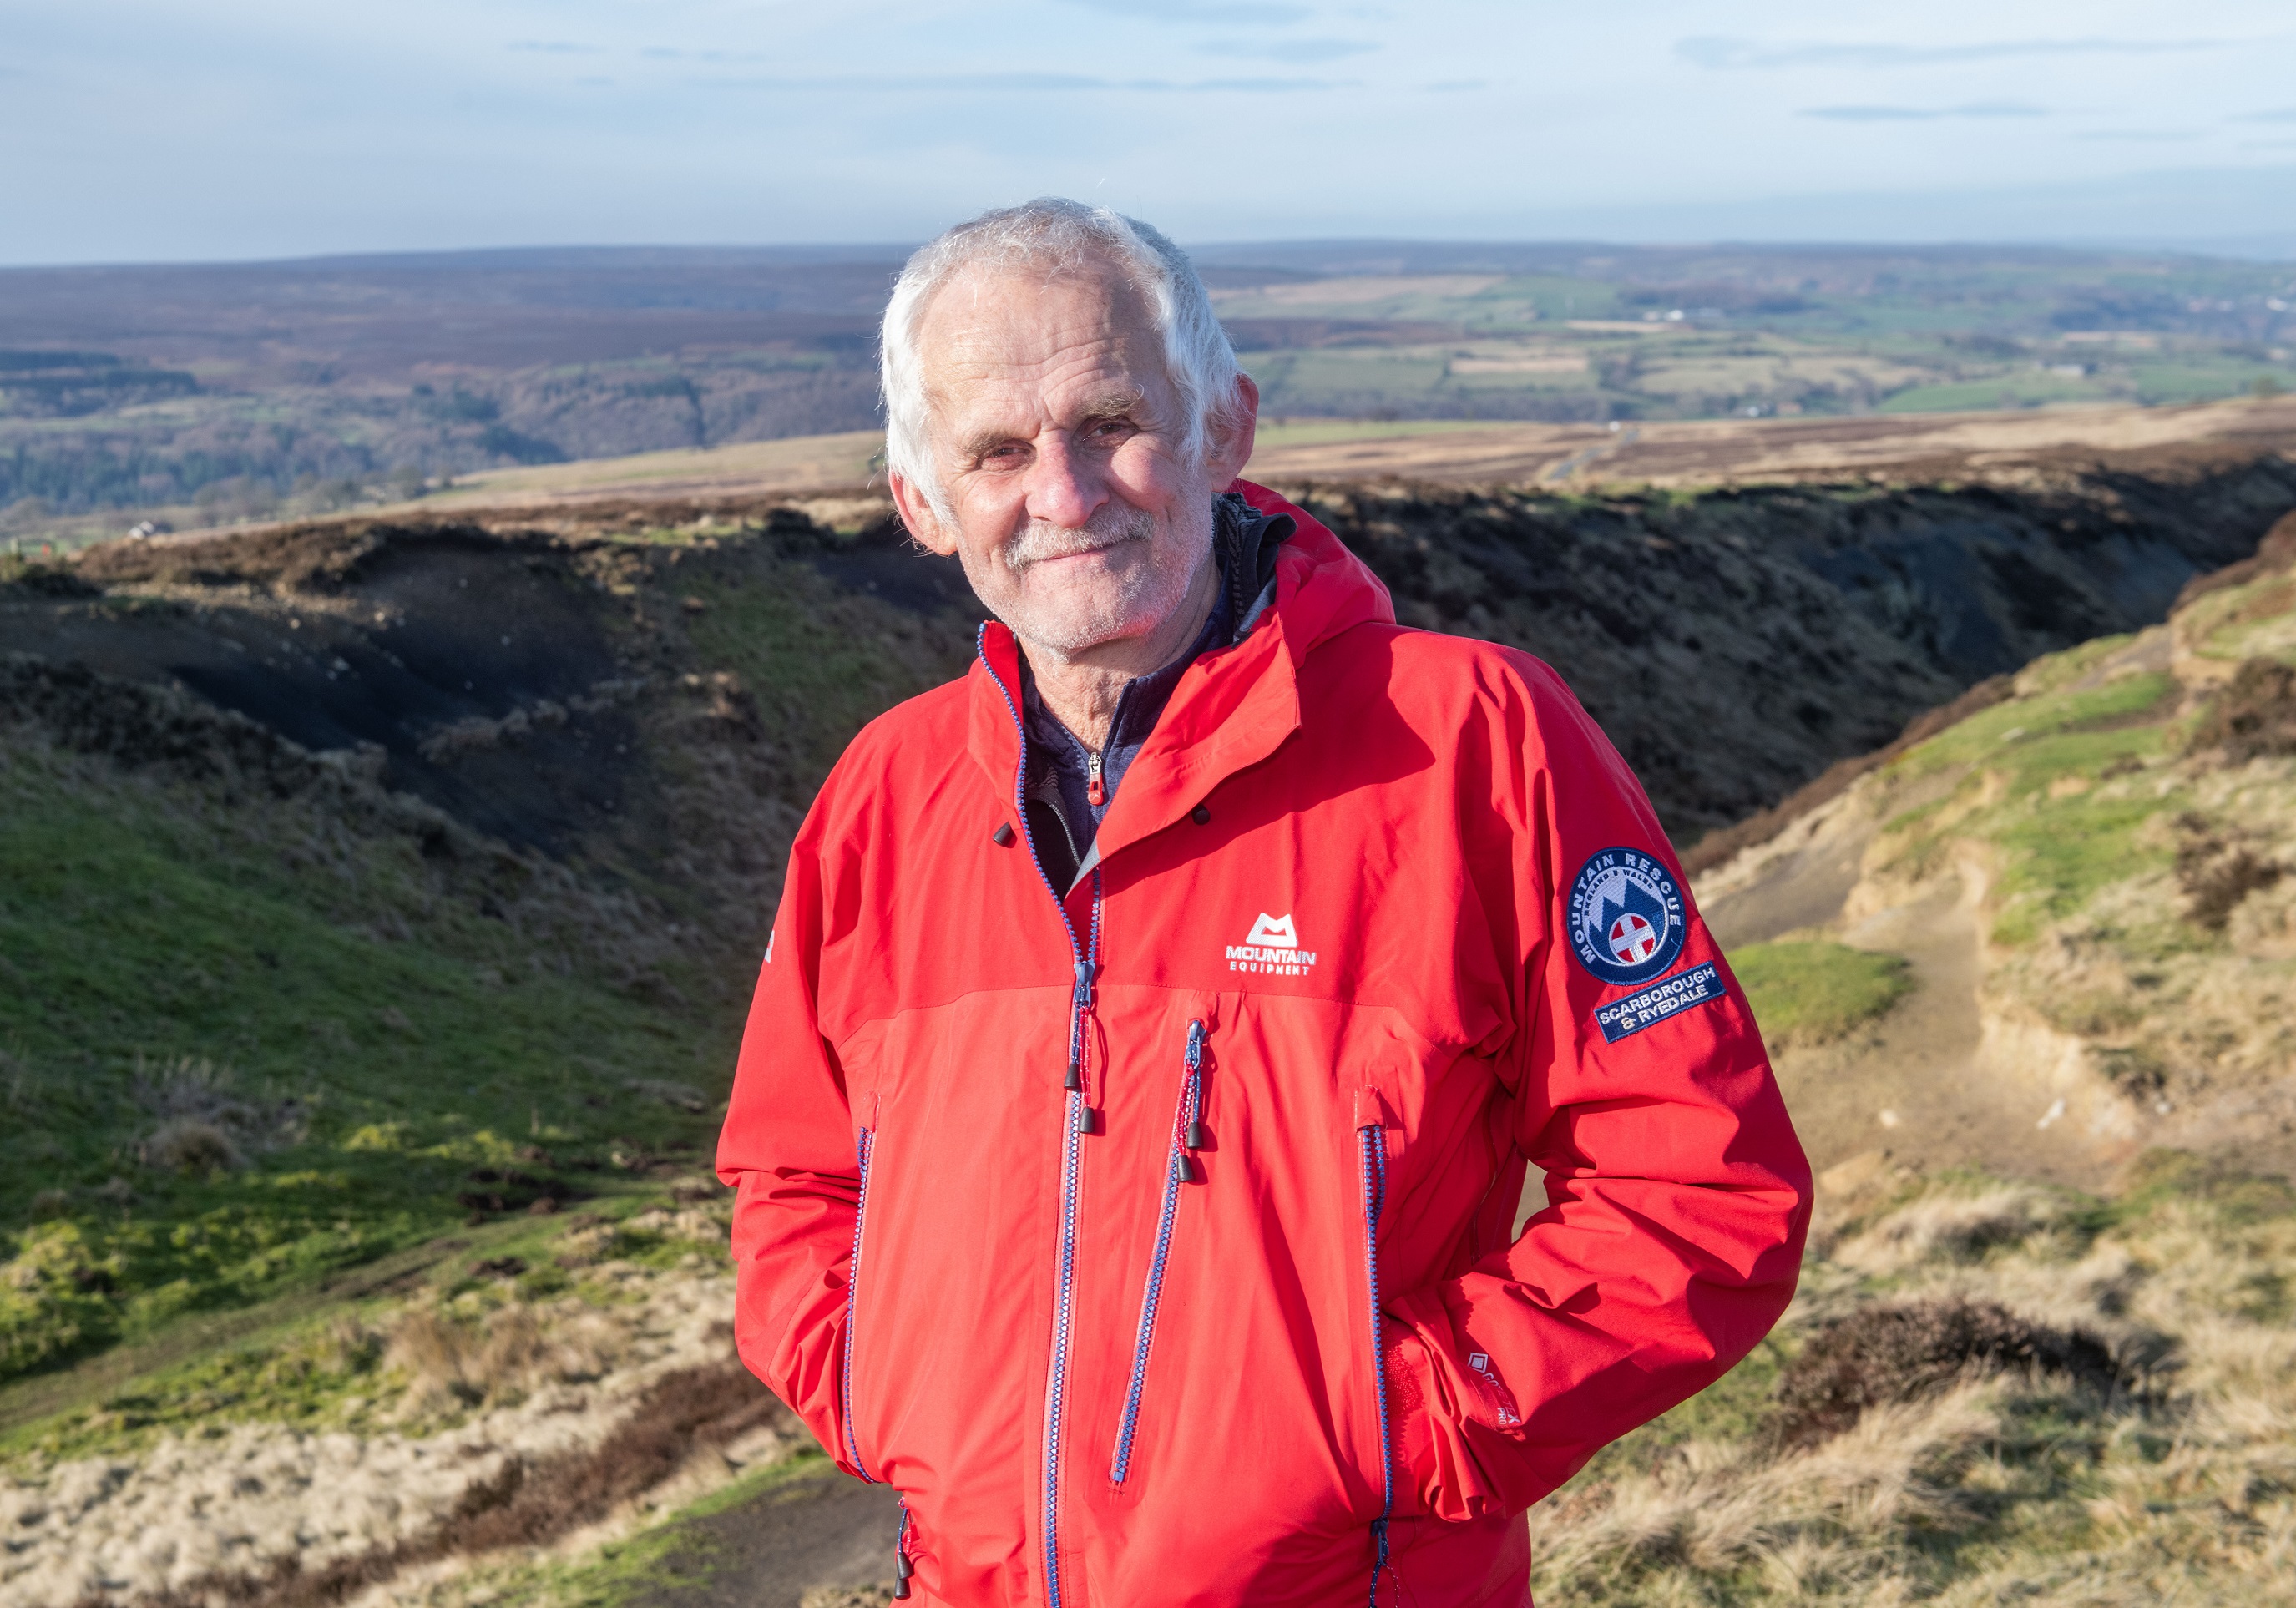 Roger Hartley a member of Scarborough and Ryedale Mountain Rescue Team 